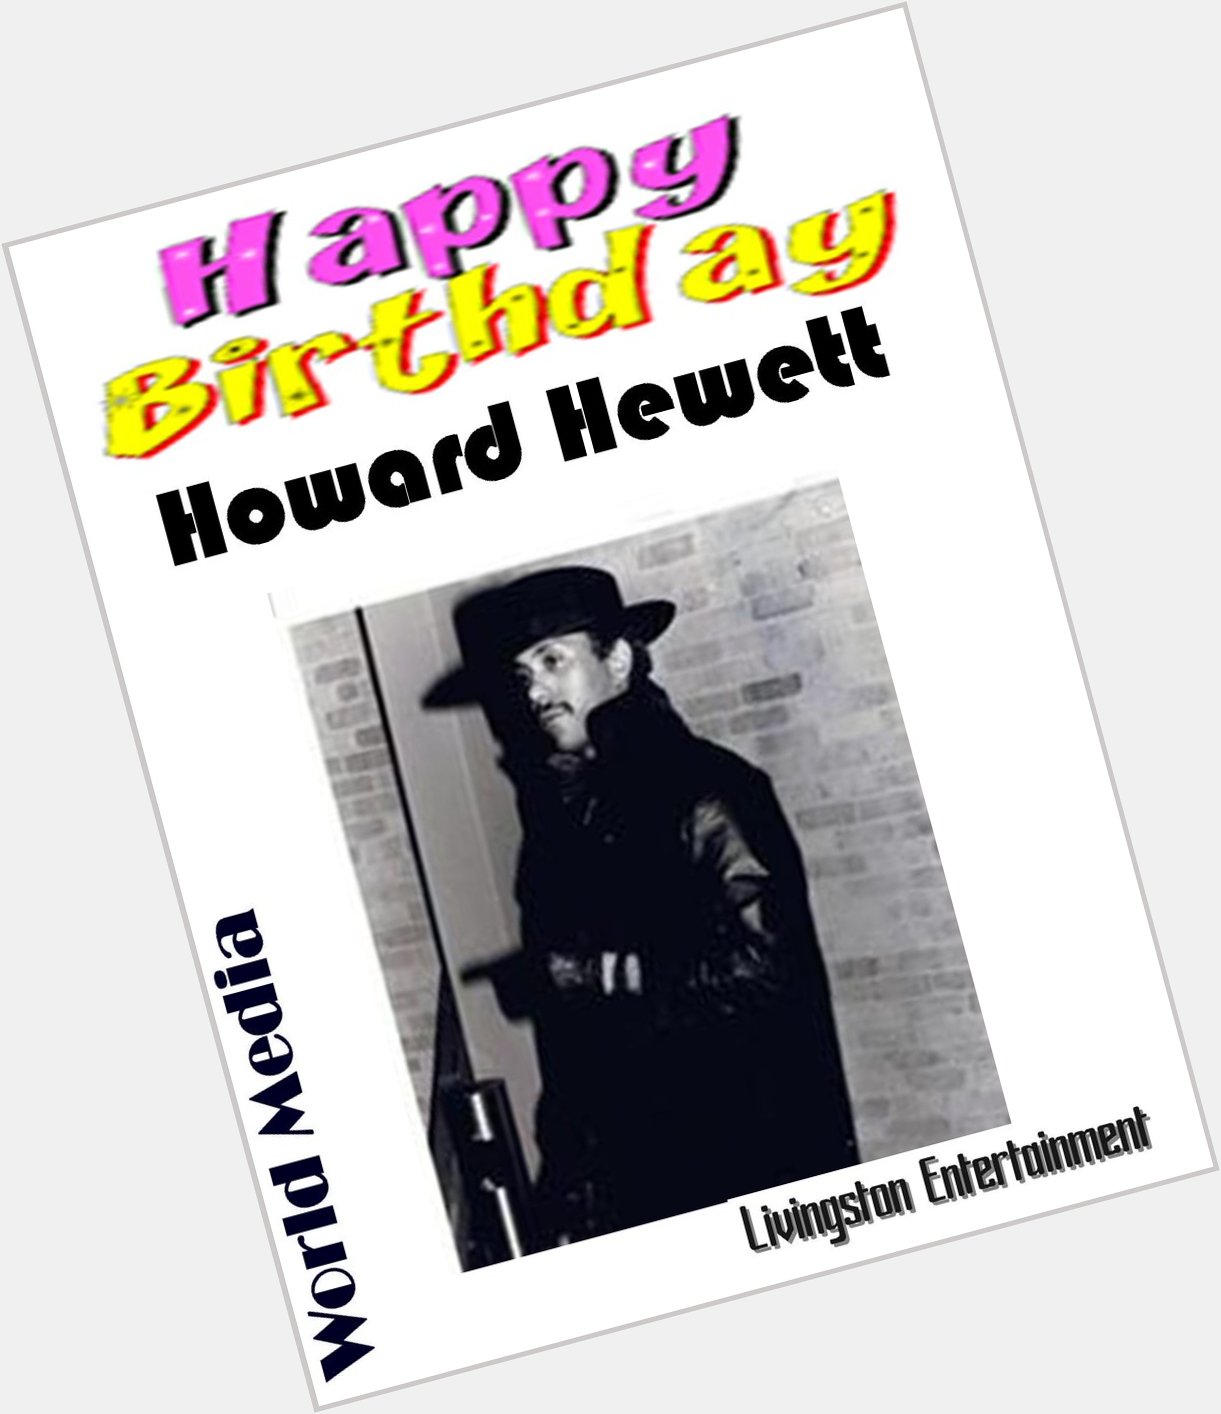 JOIN US IN WISHING MUSICAL SUPERSTAR Howard Hewett A VERY HAPPY BIRTHDAY photo courtesy George Livingston 